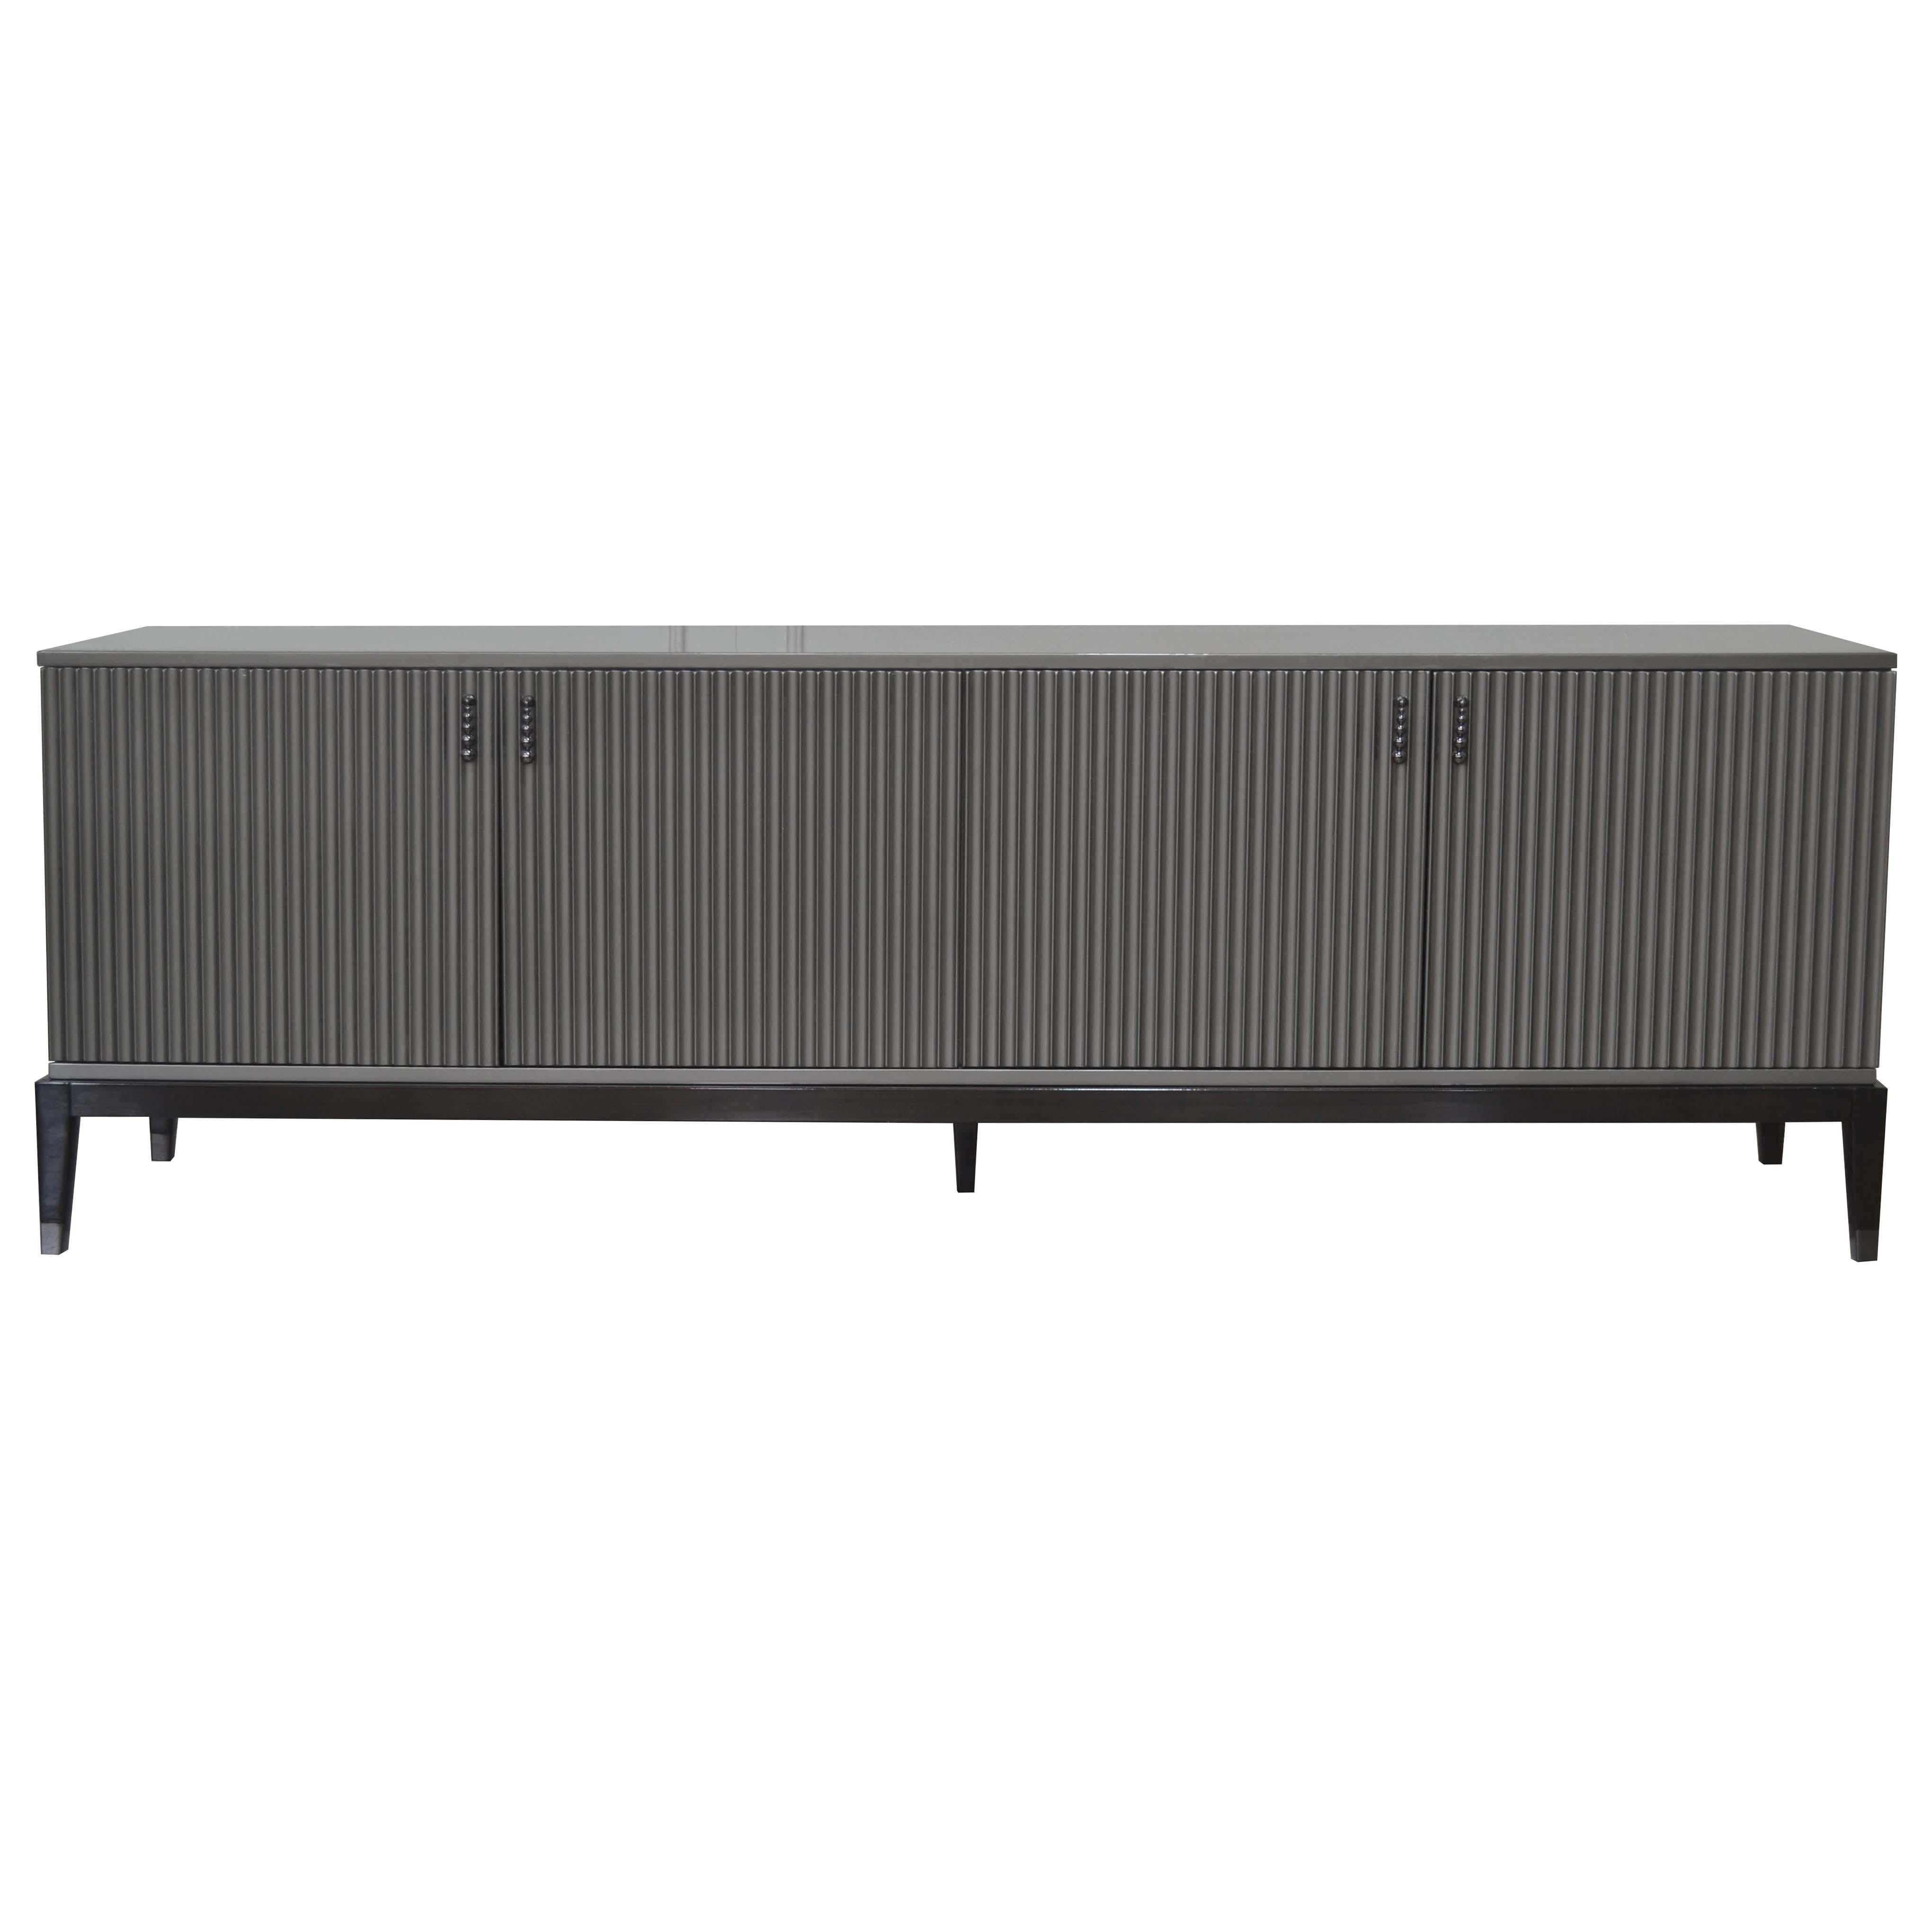 This sideboard featuring LED light inside, once at least one of the door is opened. Laquered in Gray high-gloss is an outstanding piece in living room. Elegant and contemporary with four legs in Ebano Lucido Scuro. Also it has internal leather